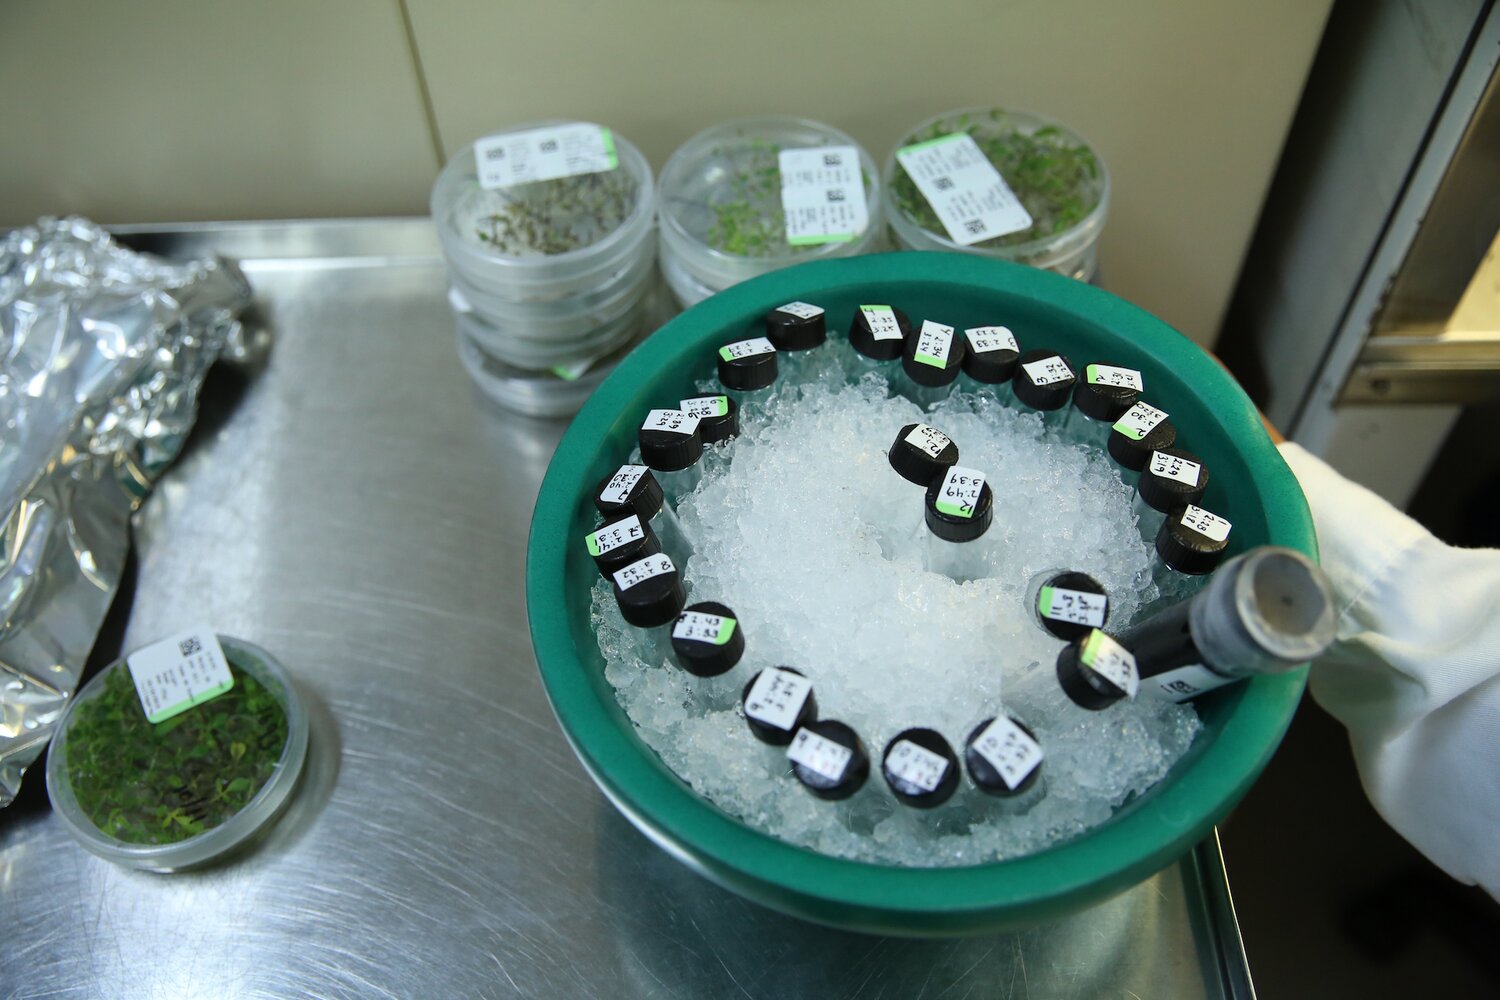 Treatment of potato apical buds with cryoprotective solution (PVS2). Vials are placed on ice to increase survival from the toxicity of the PVS2 solution.